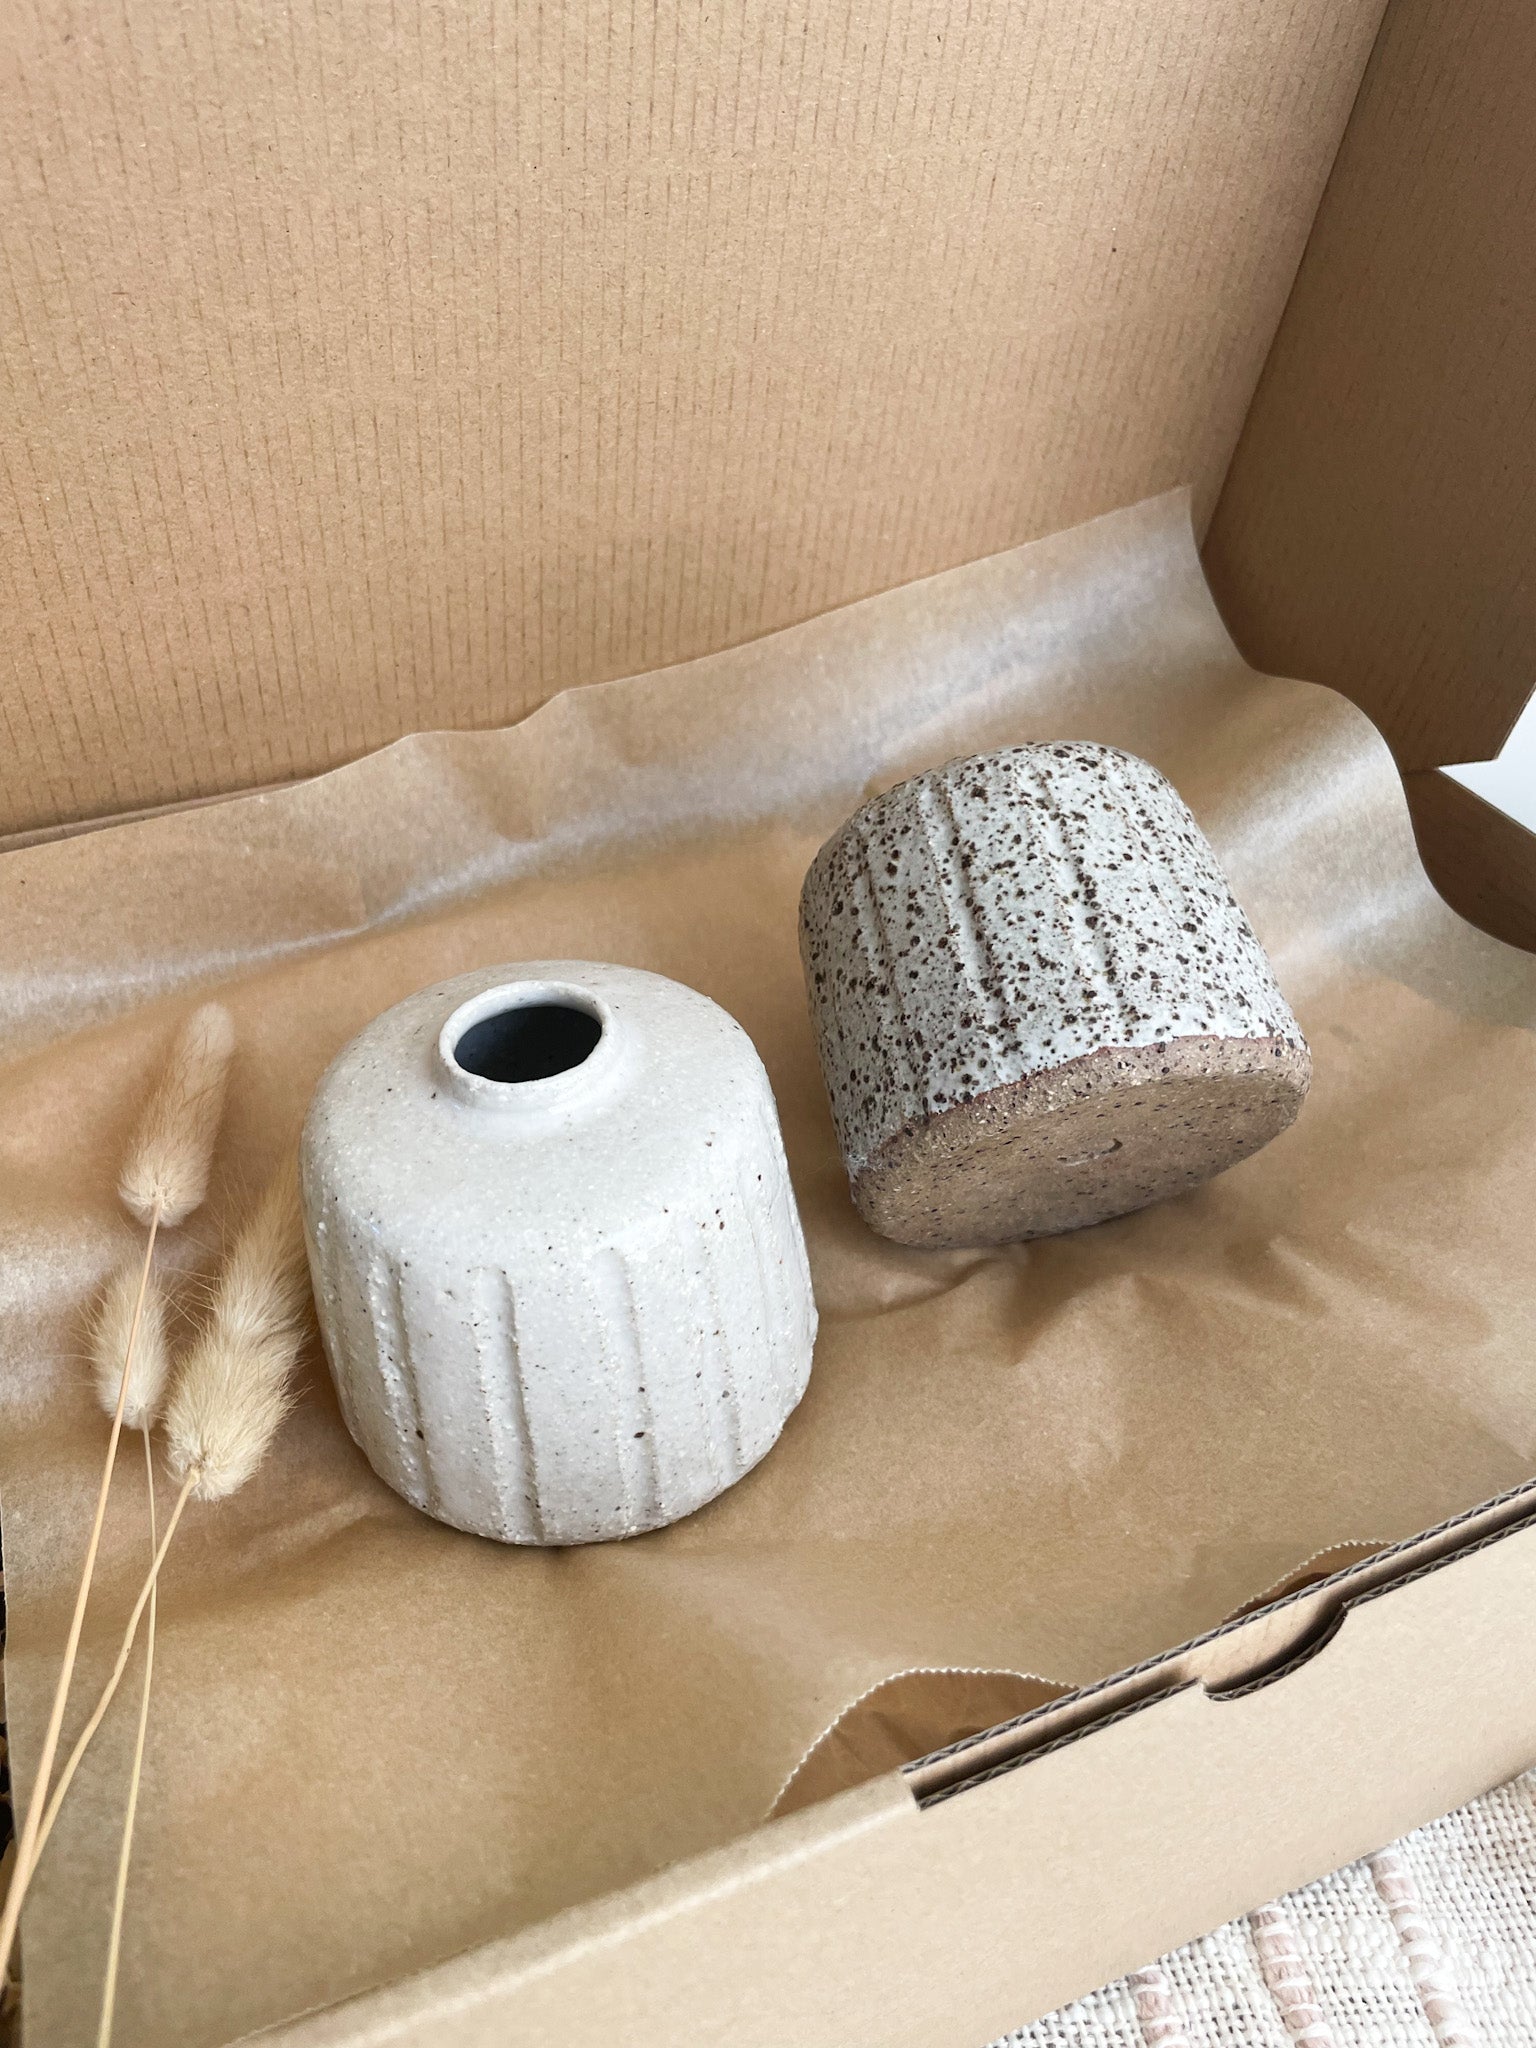 Two small ceramic vases packed in a gift box